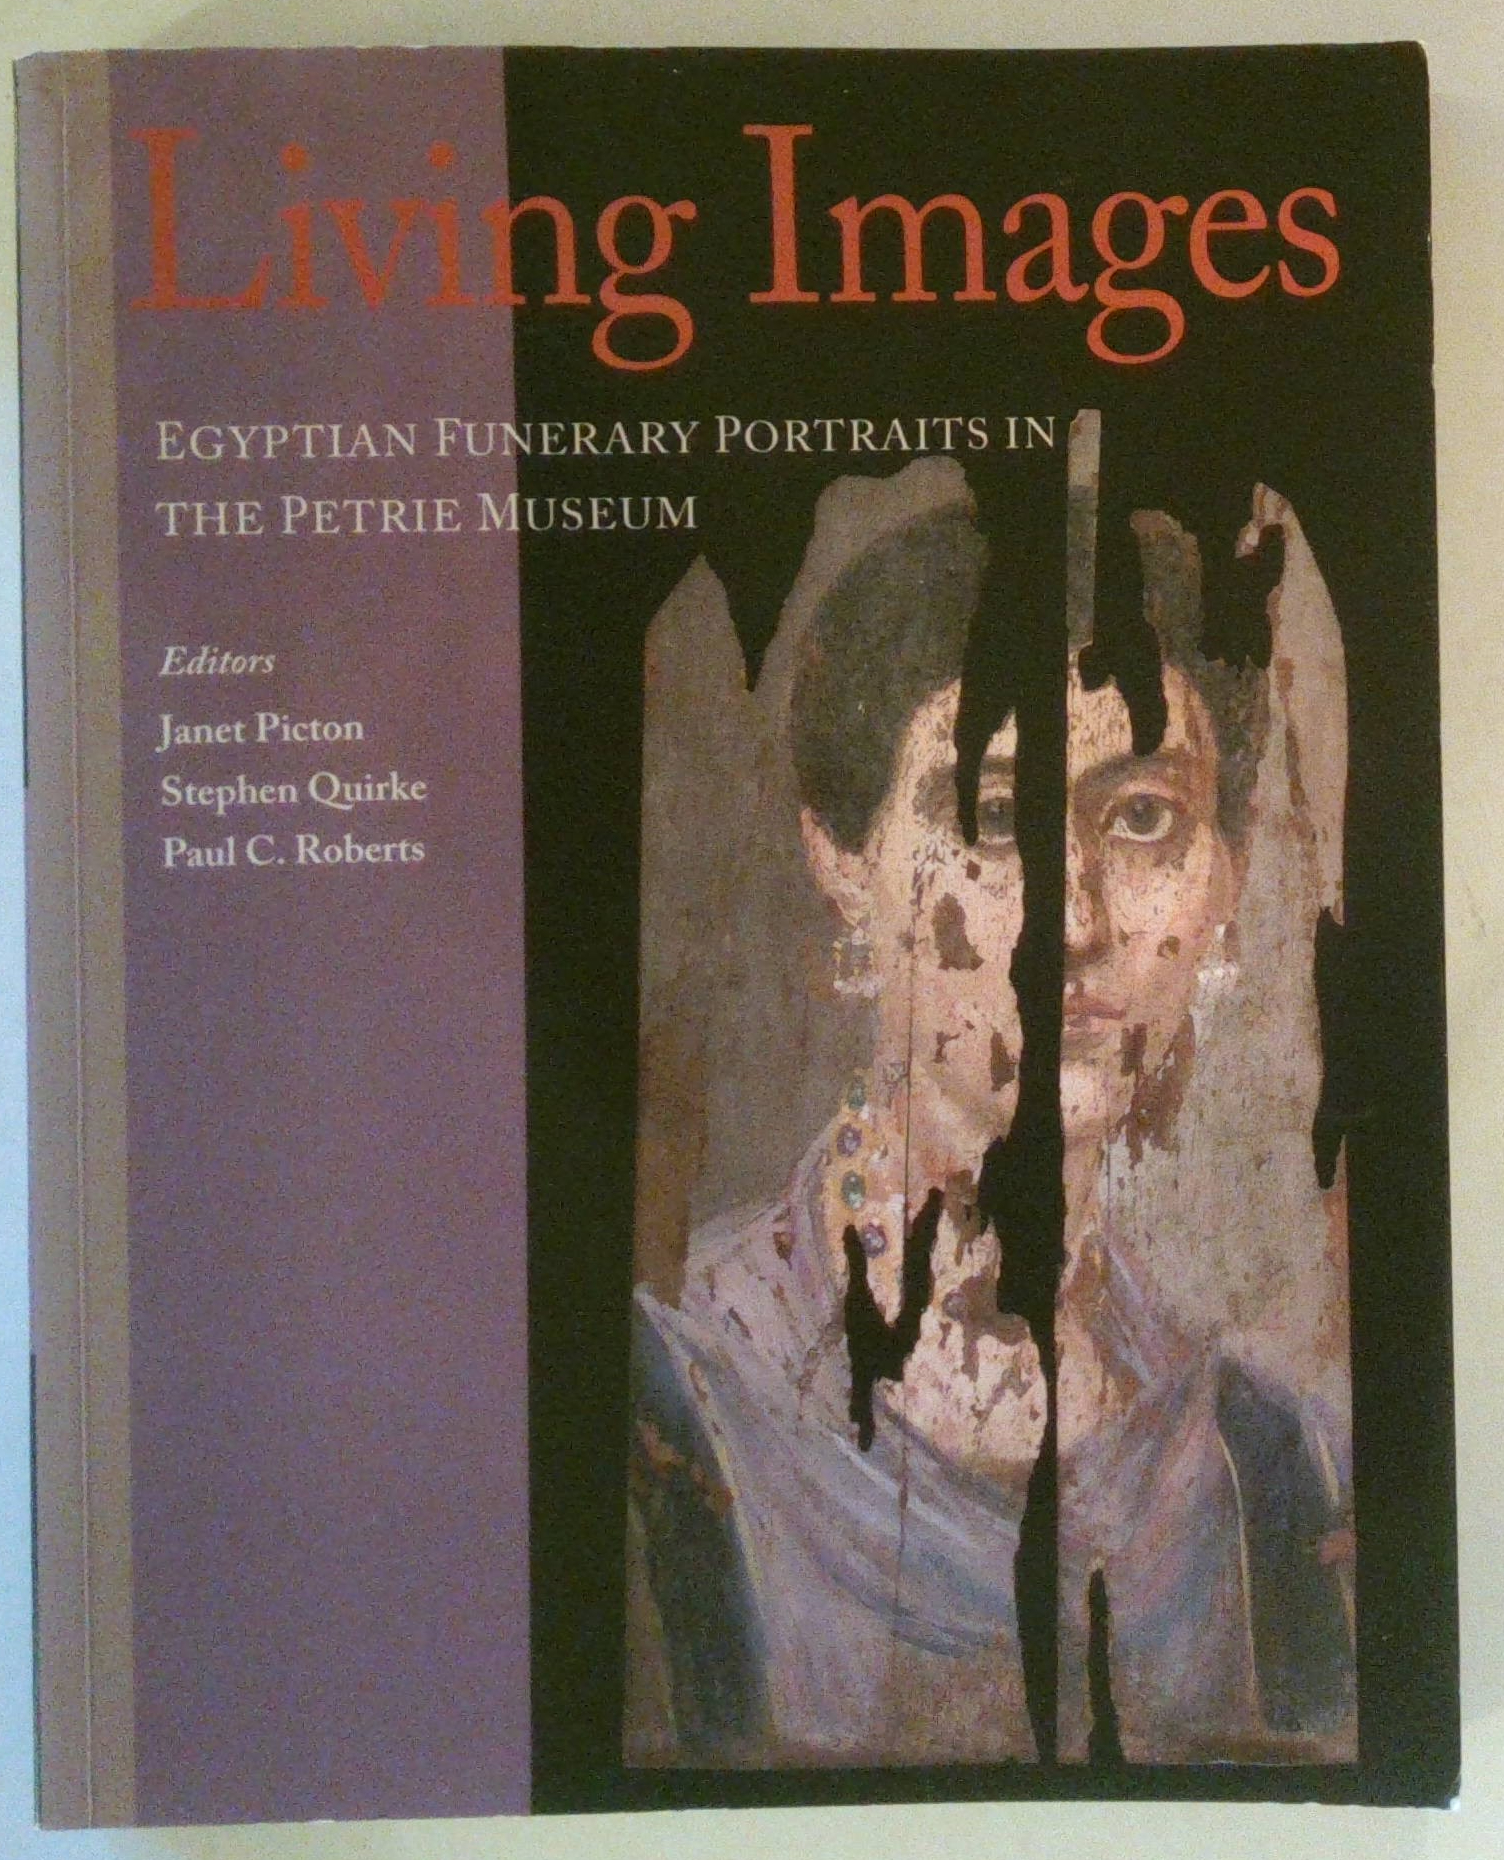 Living Images | Egyptian Funerary Portraits in the Petrie Museum (University College London Institute of Archaeology Publications) - Janet Picton, Stephen Quirke, Paul C Roberts (eds), Barbara Adams & Others